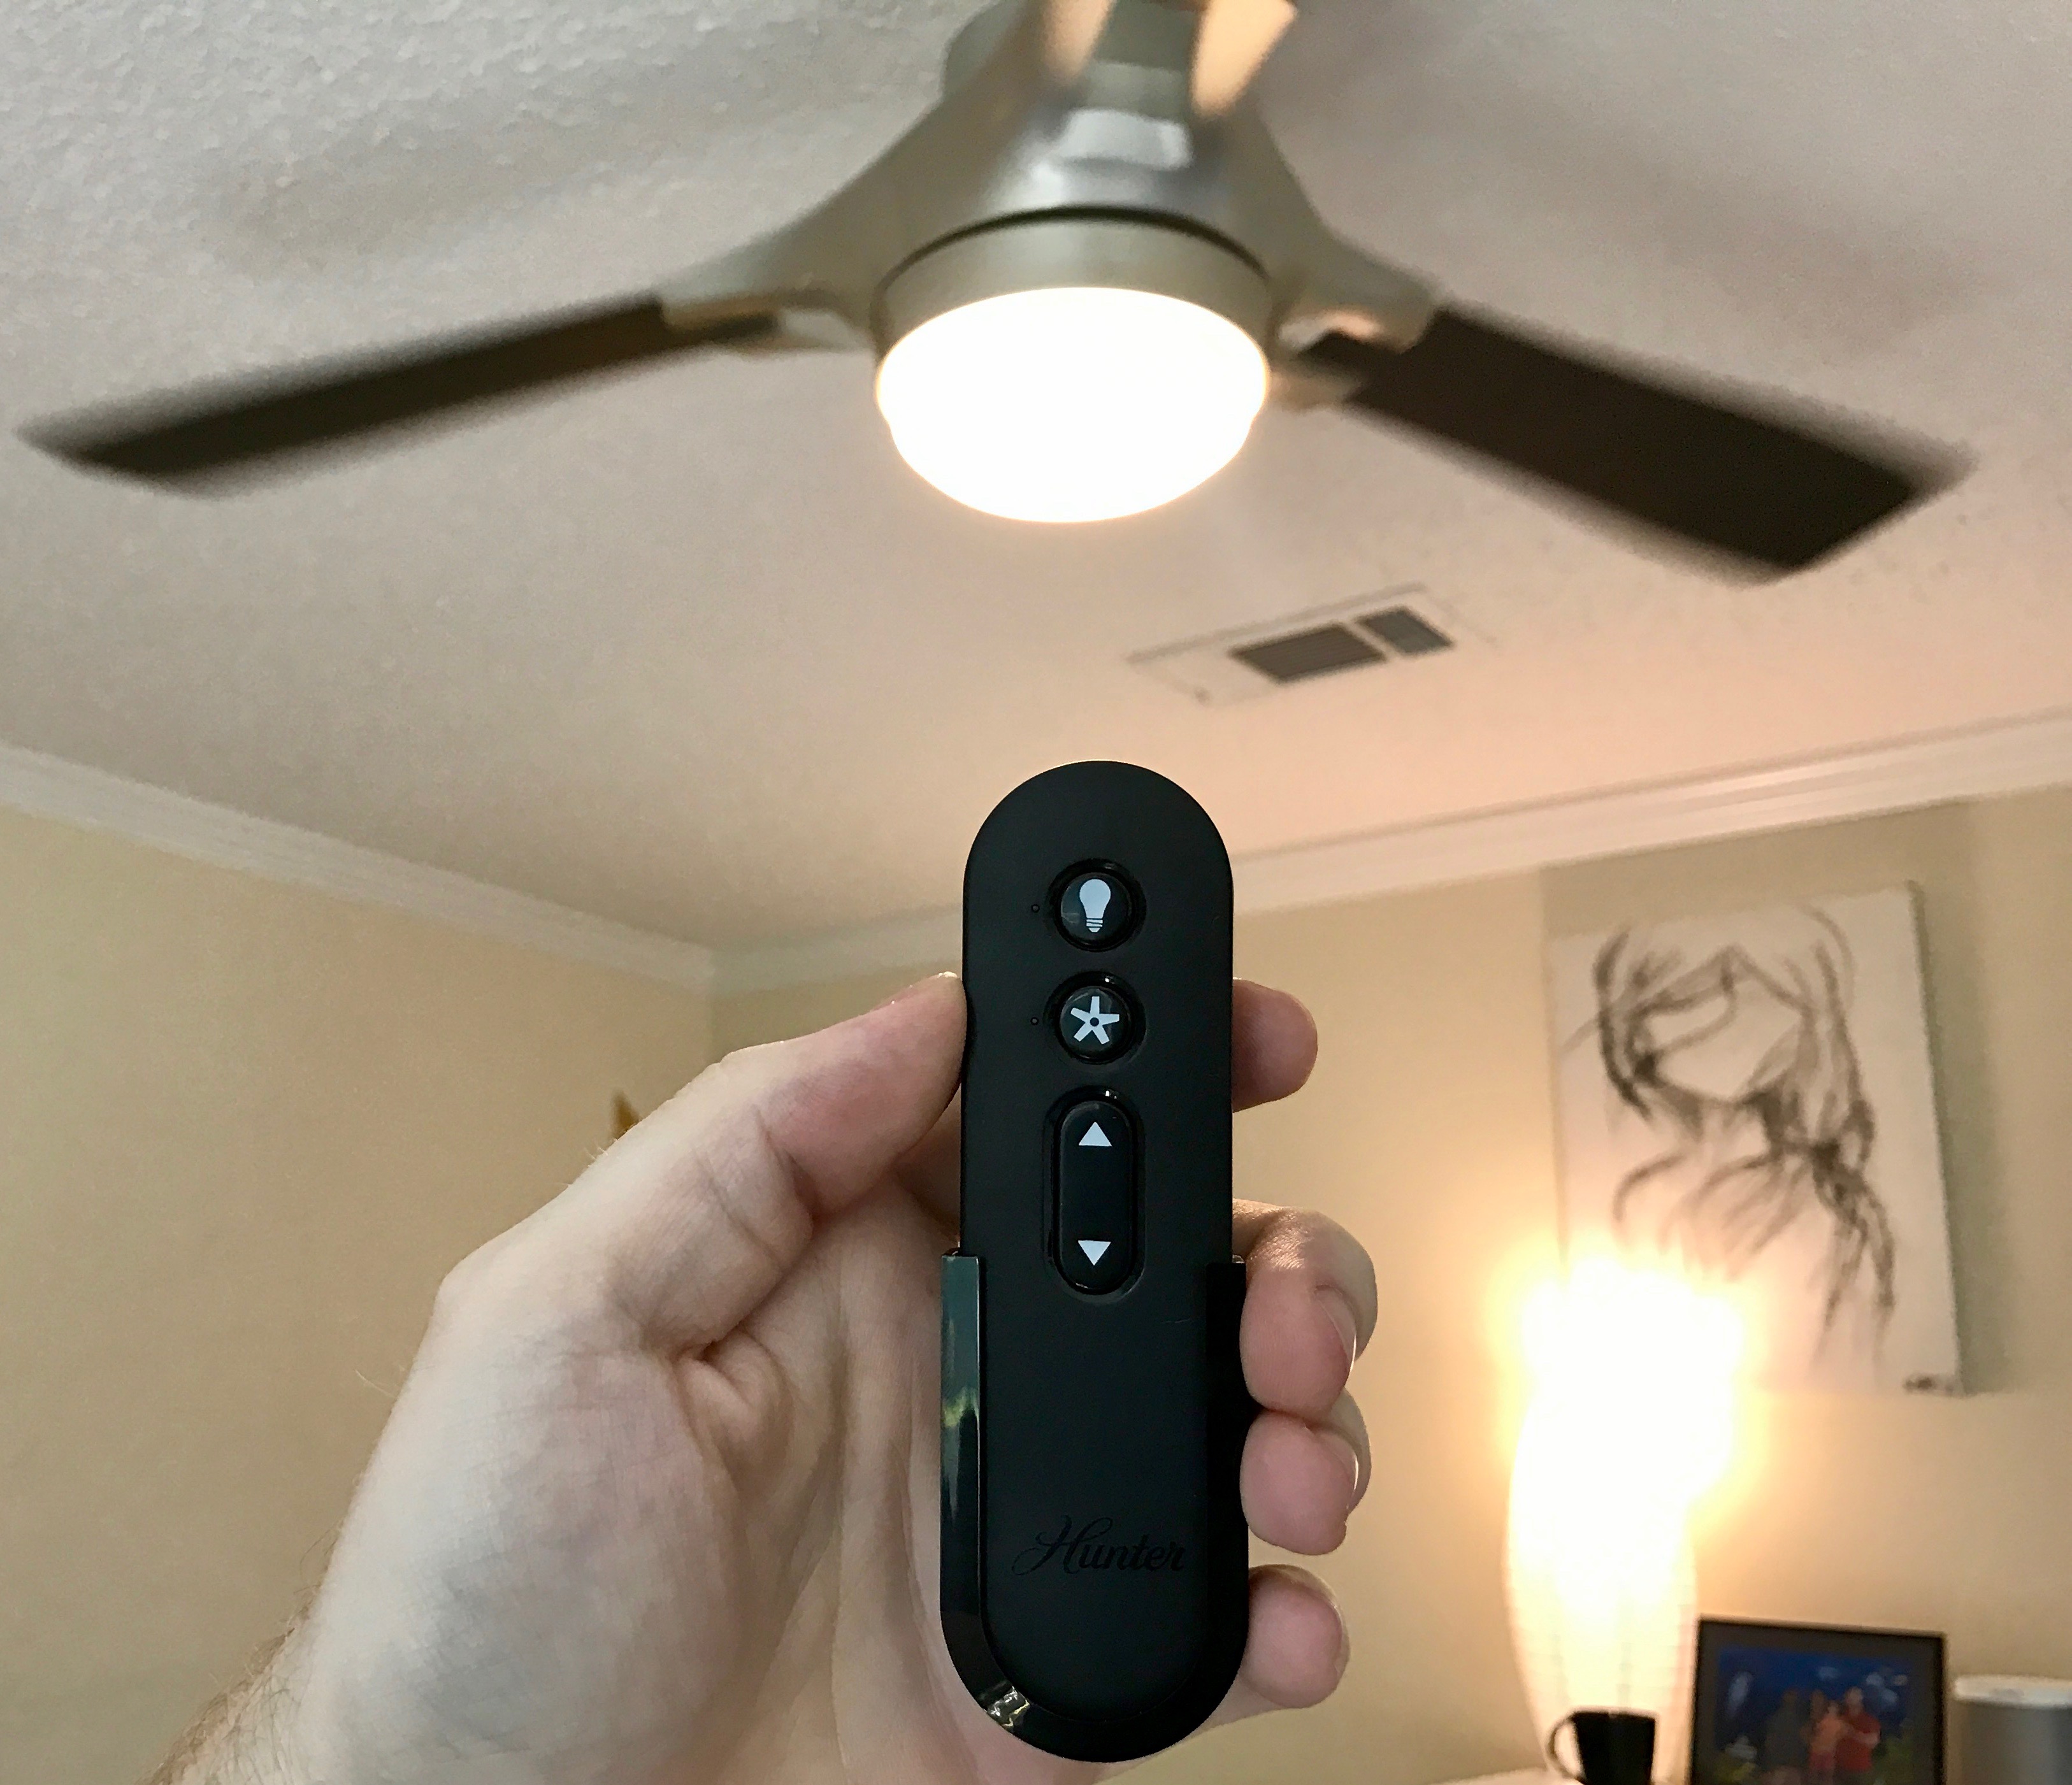 Review Hunter Simpleconnect Ceiling Fan Is A 2 In 1 Hot Essential For Home Automation 9to5mac - Can I Make My Ceiling Fan Remote Controlled